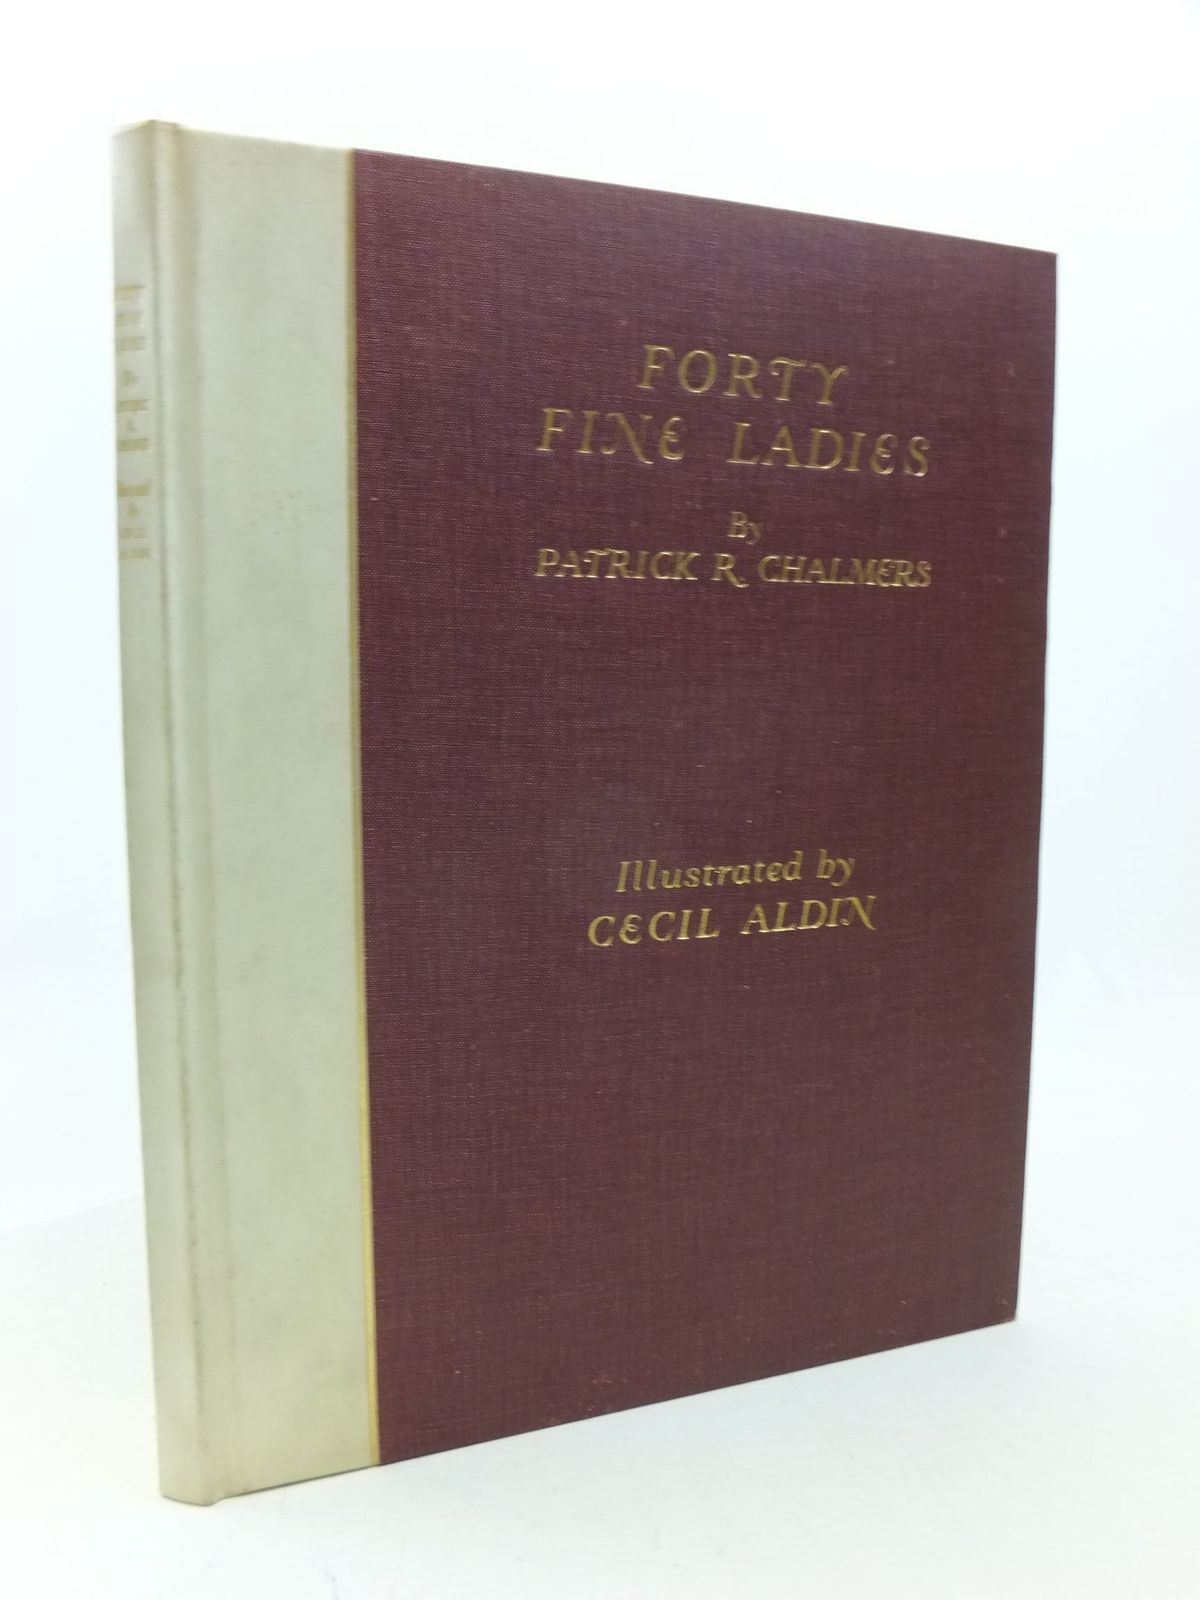 Photo of FORTY FINE LADIES written by Chalmers, Patrick R. illustrated by Aldin, Cecil published by Eyre &amp; Spottiswoode (STOCK CODE: 1109160)  for sale by Stella & Rose's Books